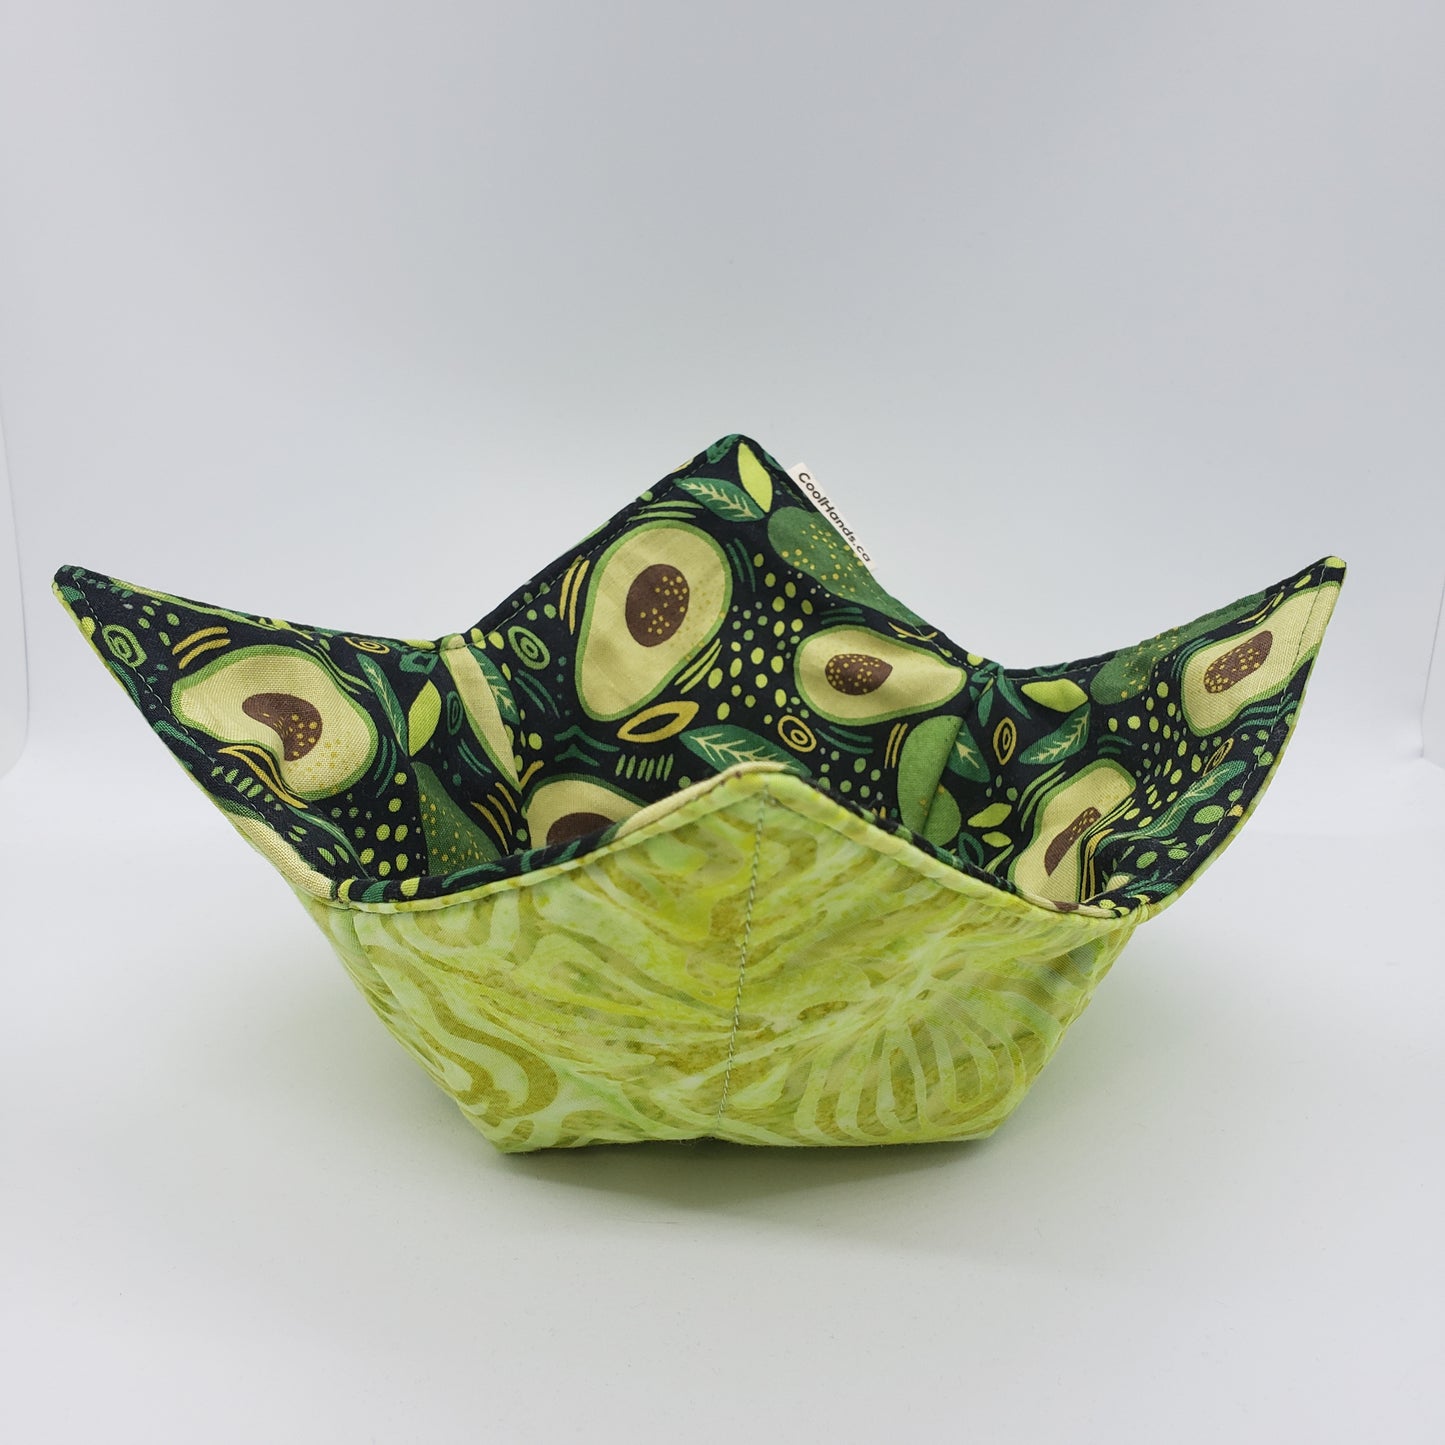 100% Cotton Microwavable Bowl Cozy - A Guac On The Wild Side